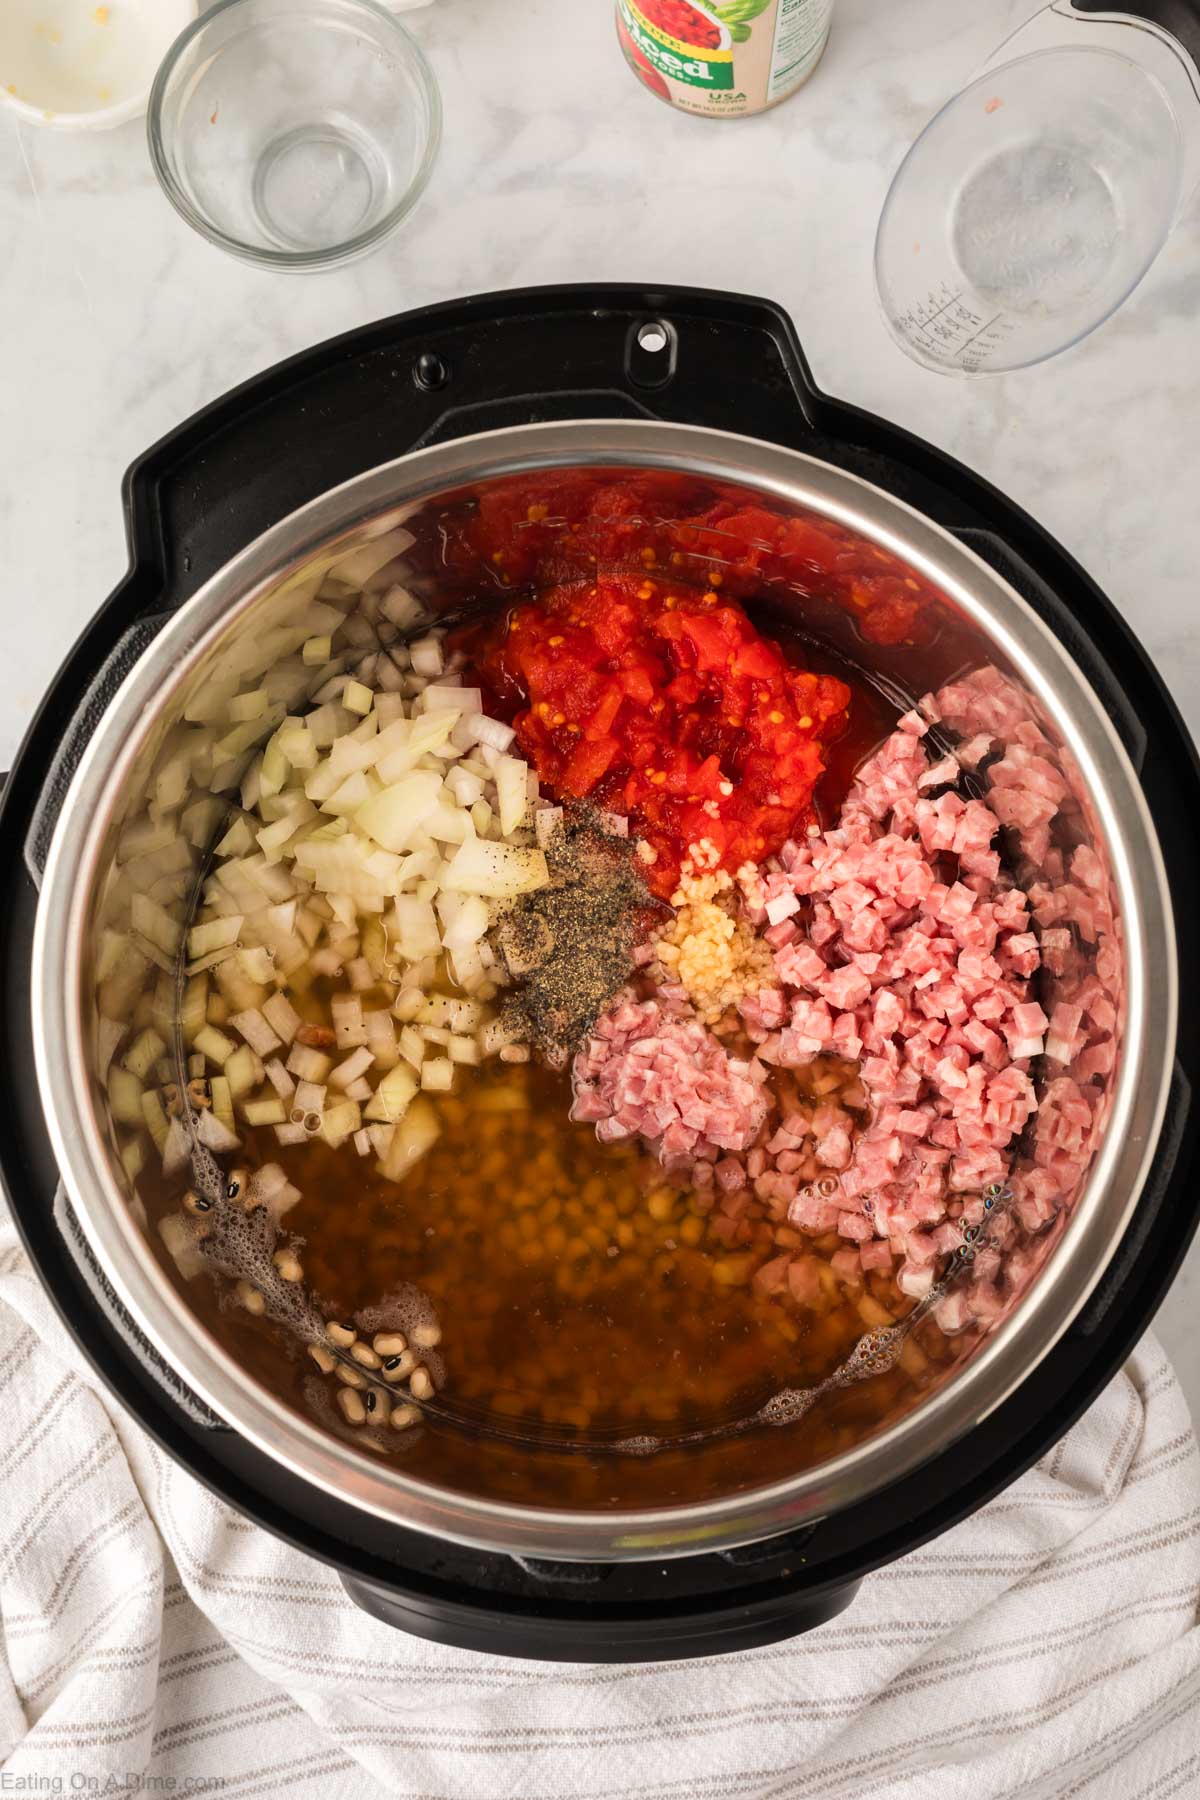 Adding the ingredients to the instant pot